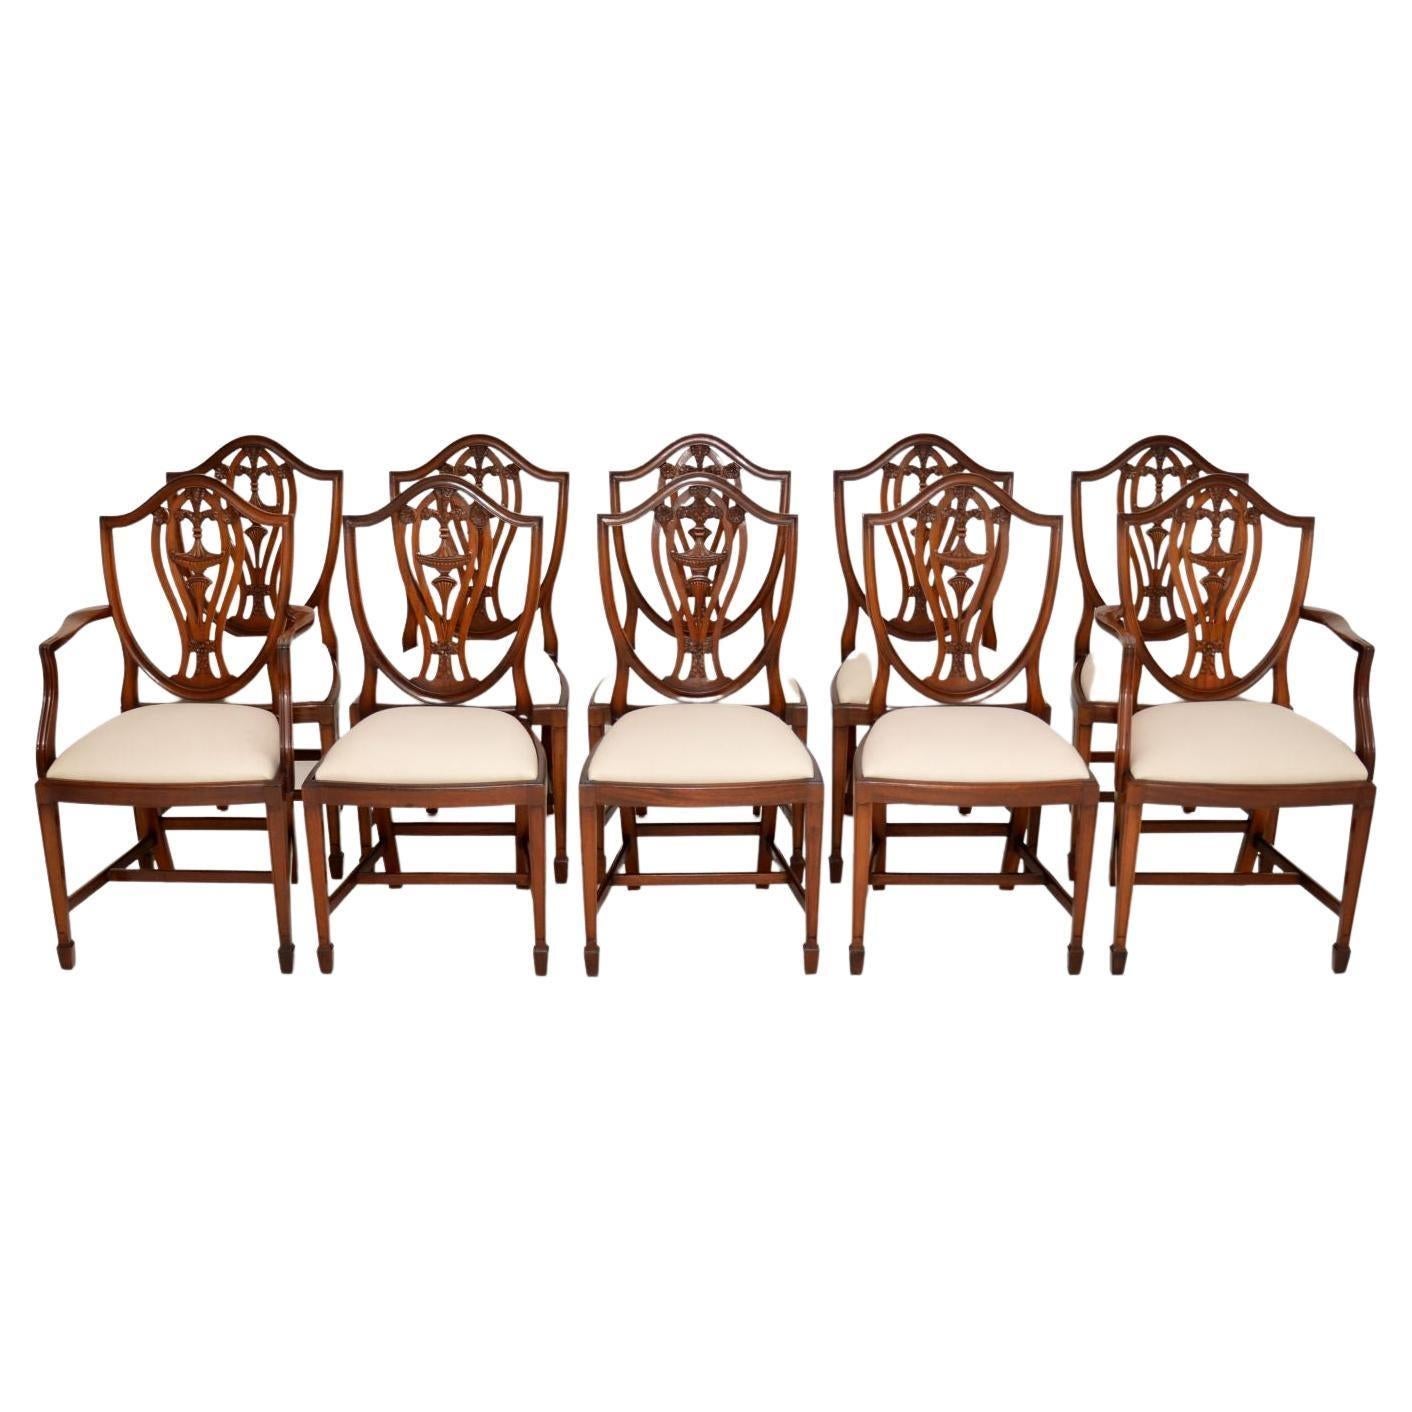 Set of 10 Antique Adam Style Dining Chairs 8